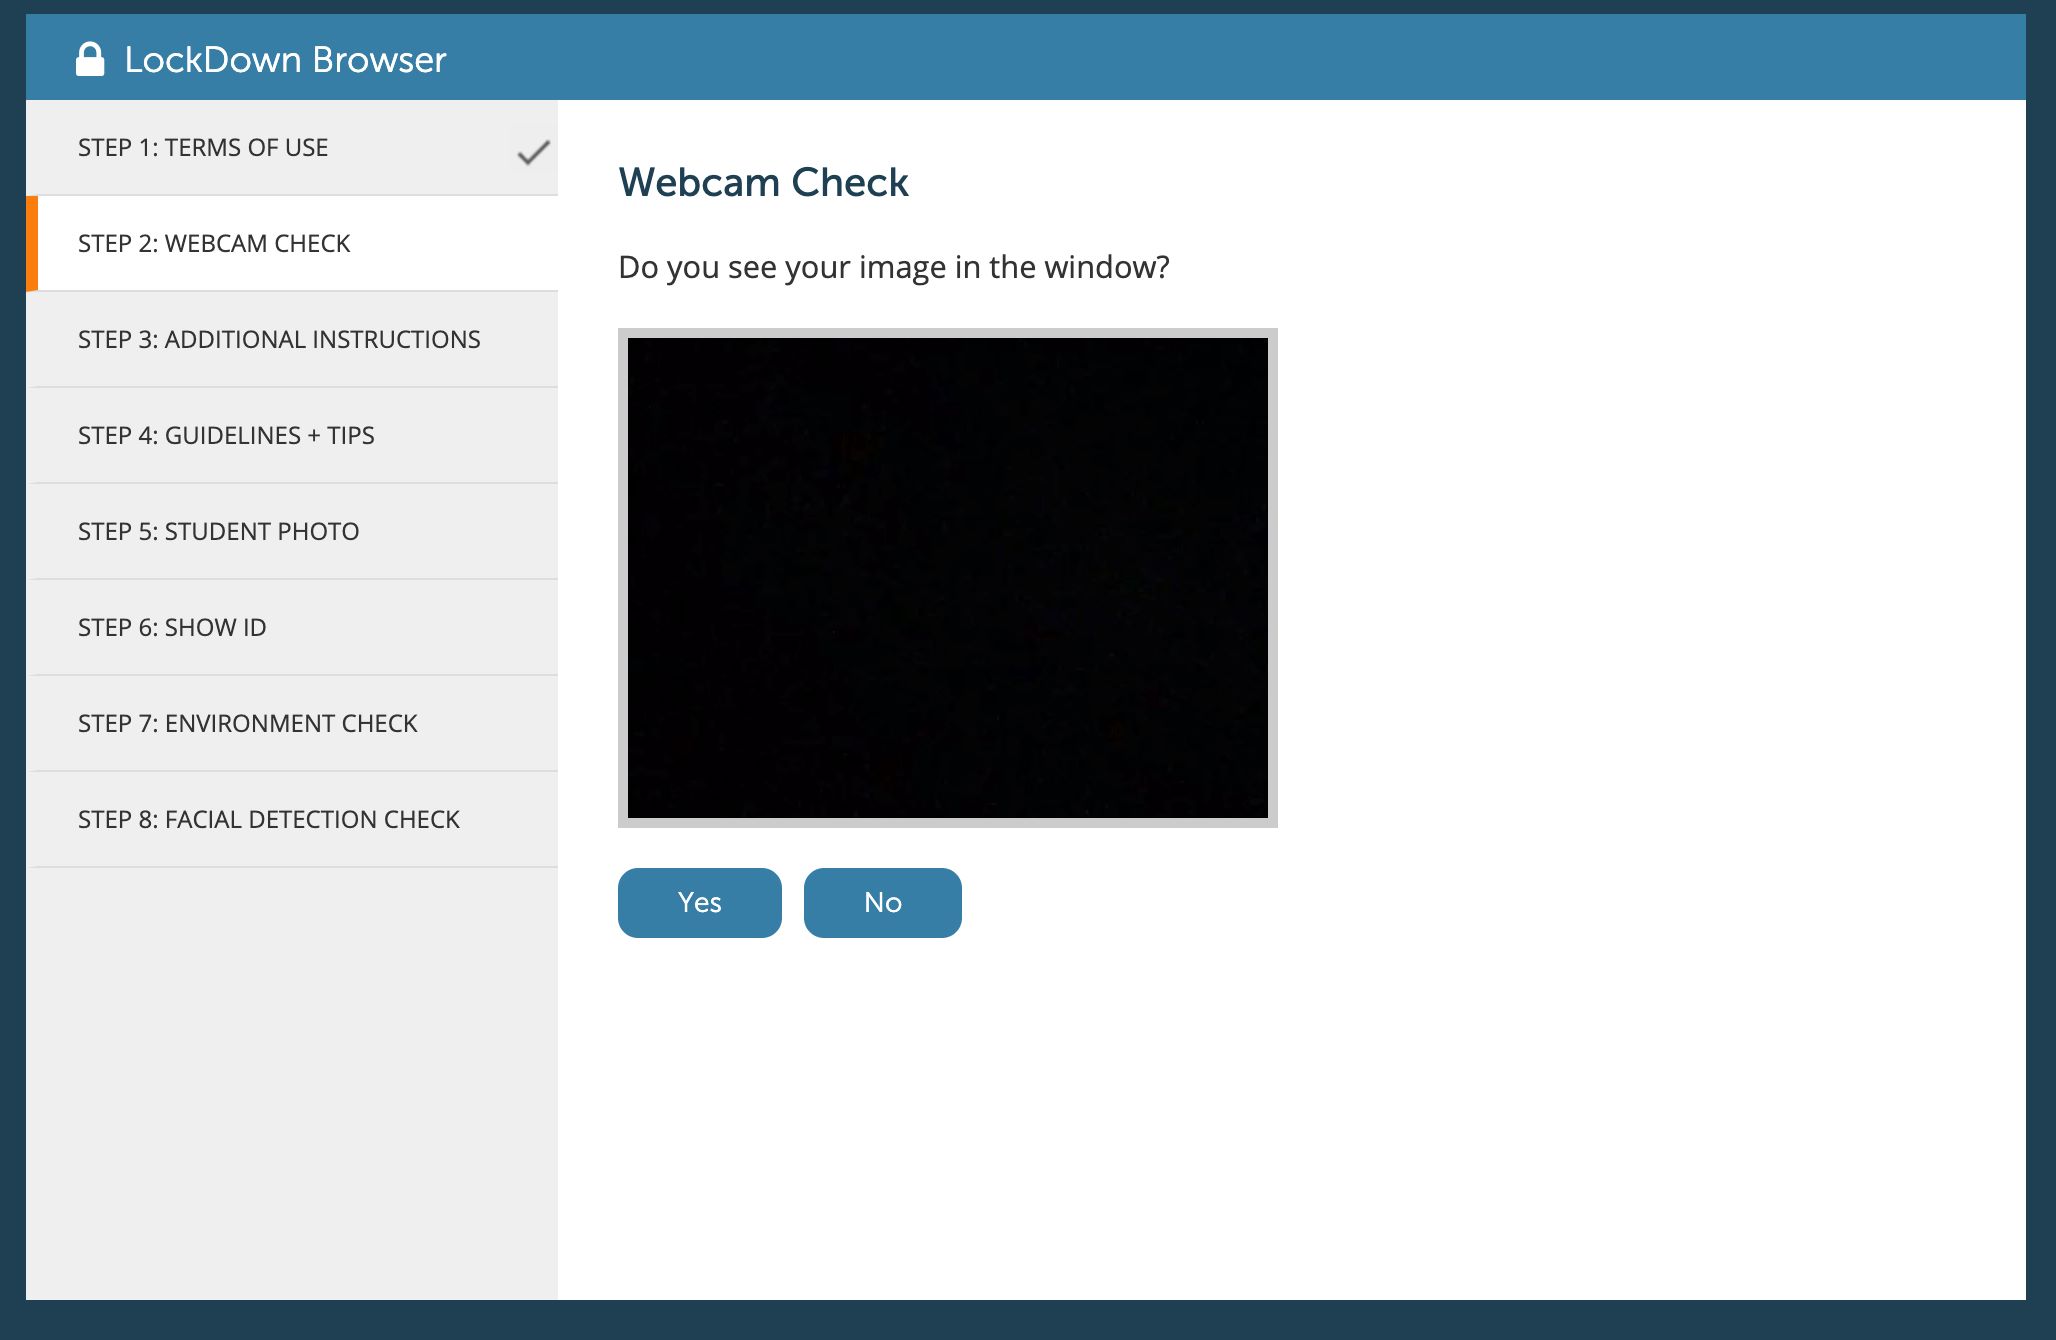 How To Cheat With Respondus Lockdown Browser Webcam